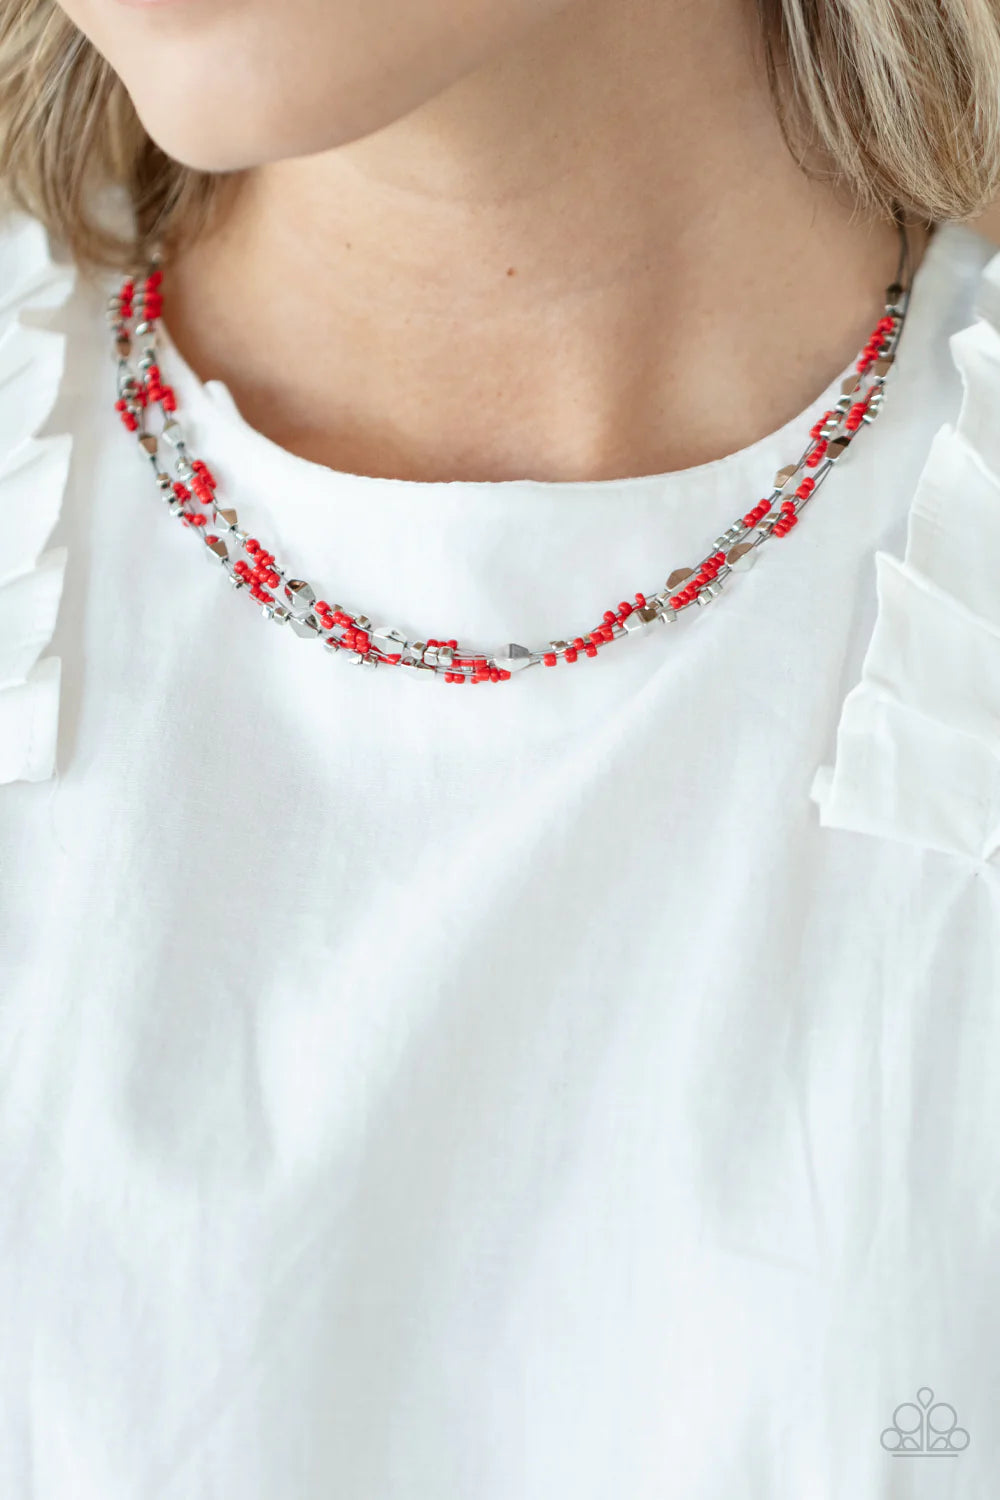 Explore Every Angle Red Paparazzi Necklace